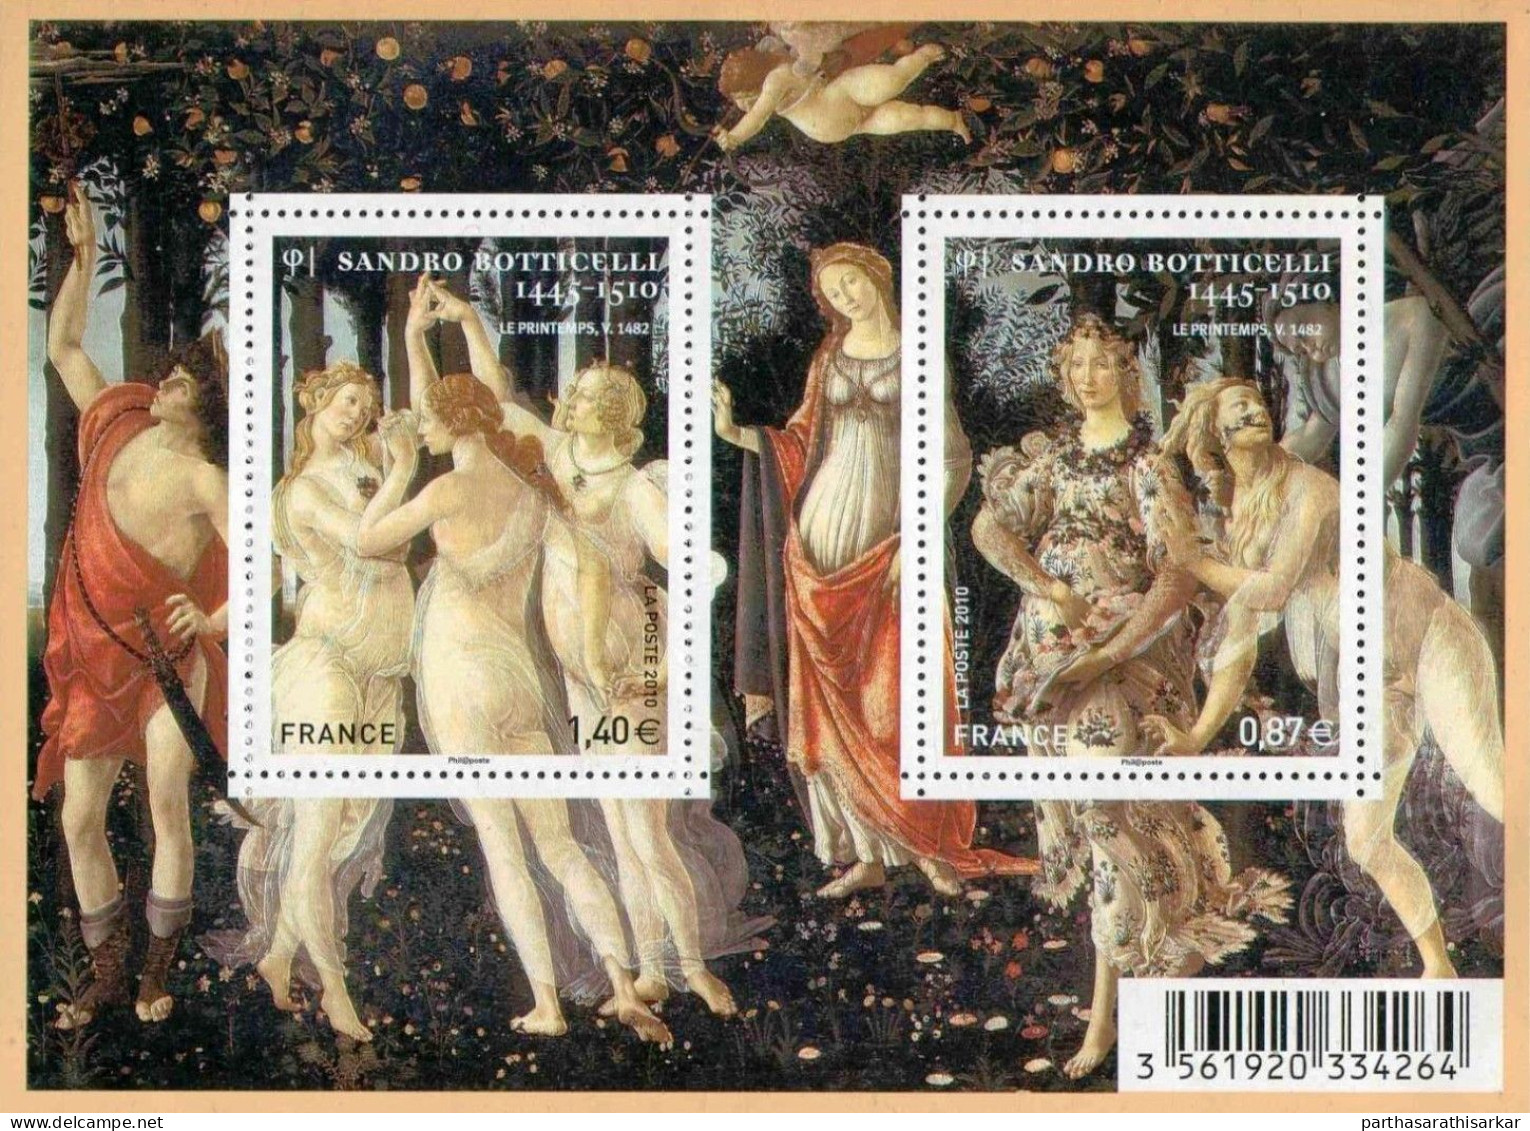 FRANCE 2010 500TH ANNIVERSARY OF THE DEATH OF SANDRO BOTTICELLI, 1445-1510 PAINTINGS MINIATURE SHEET MS MNH - Neufs